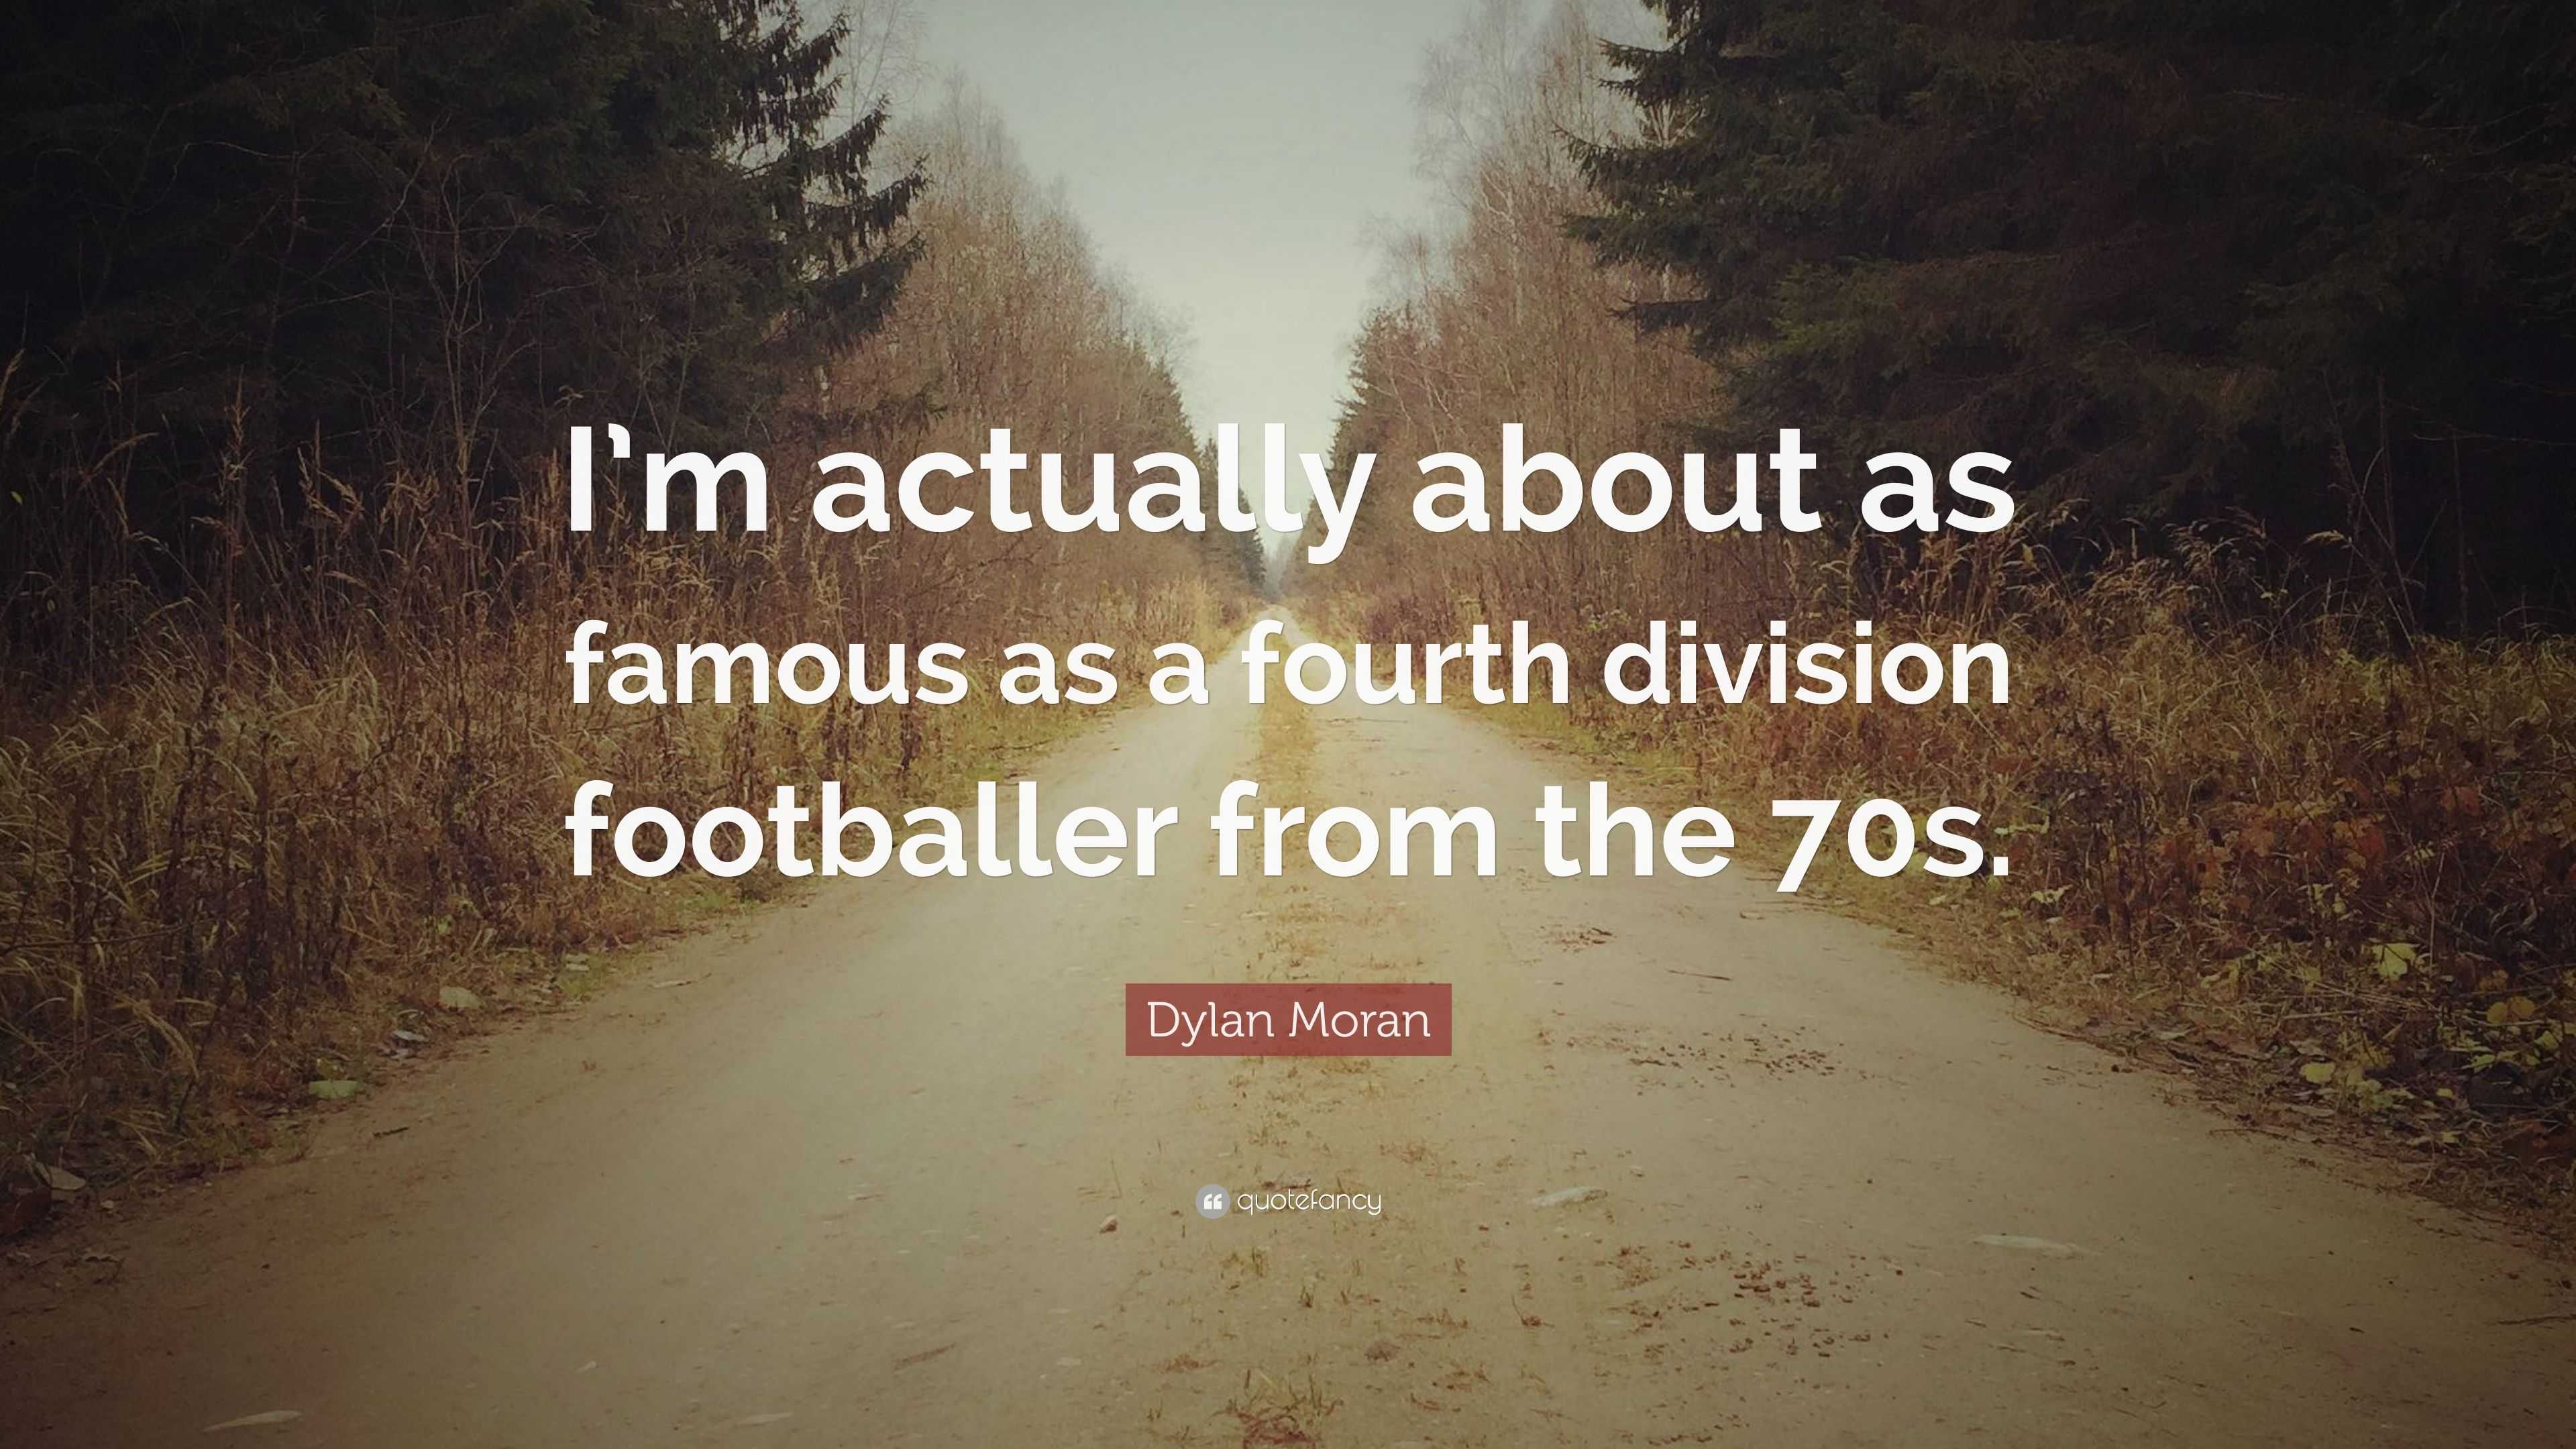 Dylan Moran Quote: “I’m actually about as famous as a fourth division